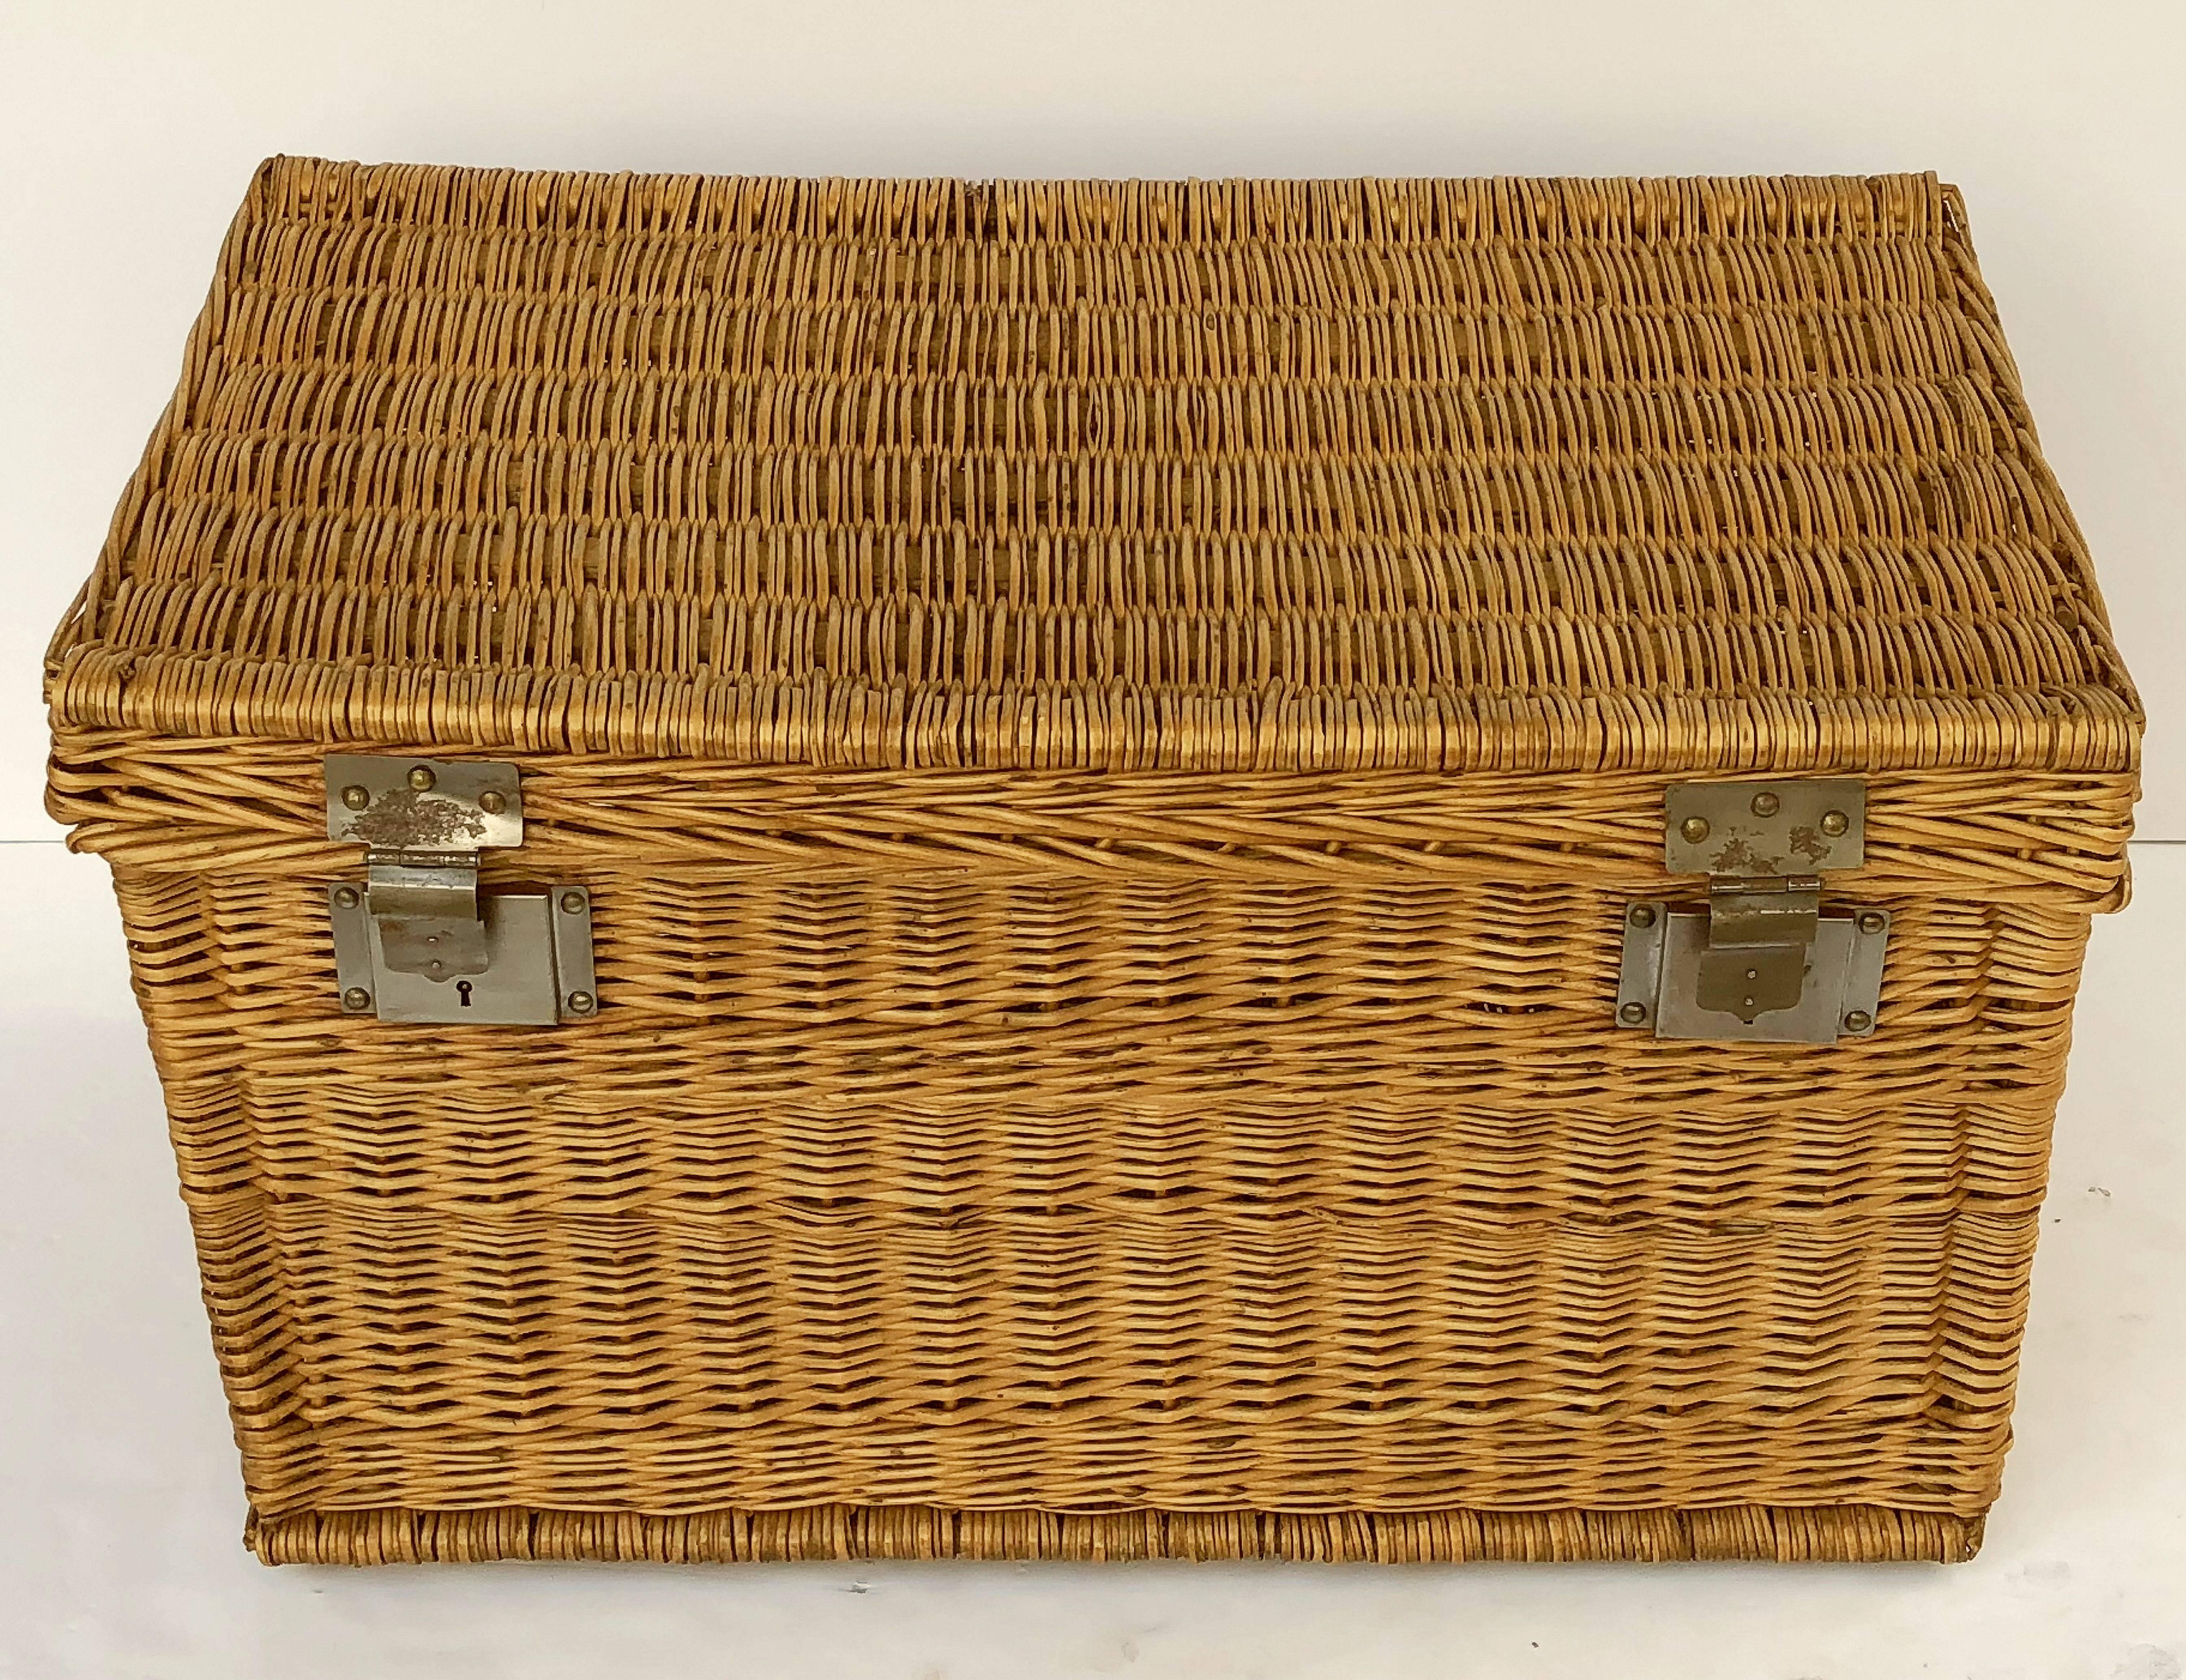 A large French basket hamper of woven willow with steel hardware and handles on each side. With wooden runners on underside.

Several available in this style, slight variations of size.

Note: Latches do not always close and lock.